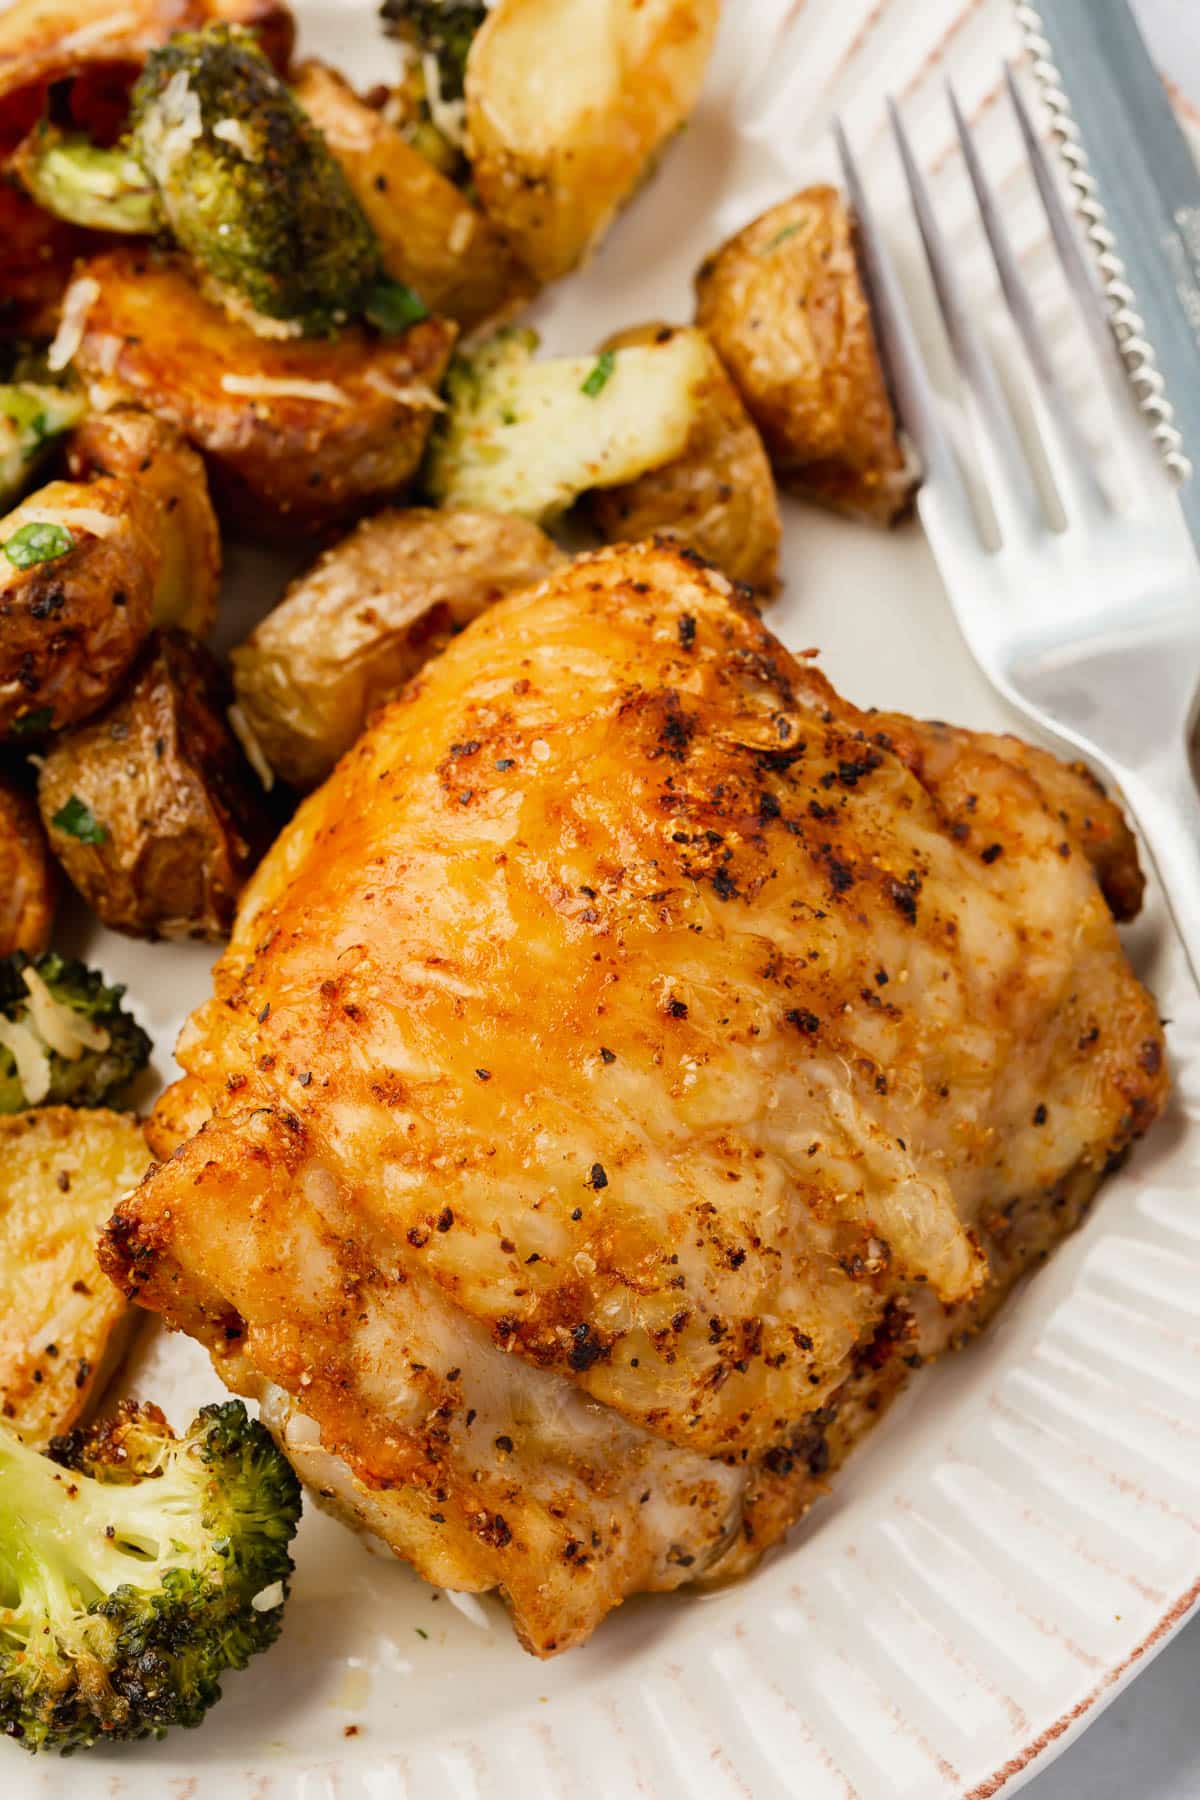 A closeup of a crispy air fryer chicken thigh on a plate with roasted potatoes and broccoli.